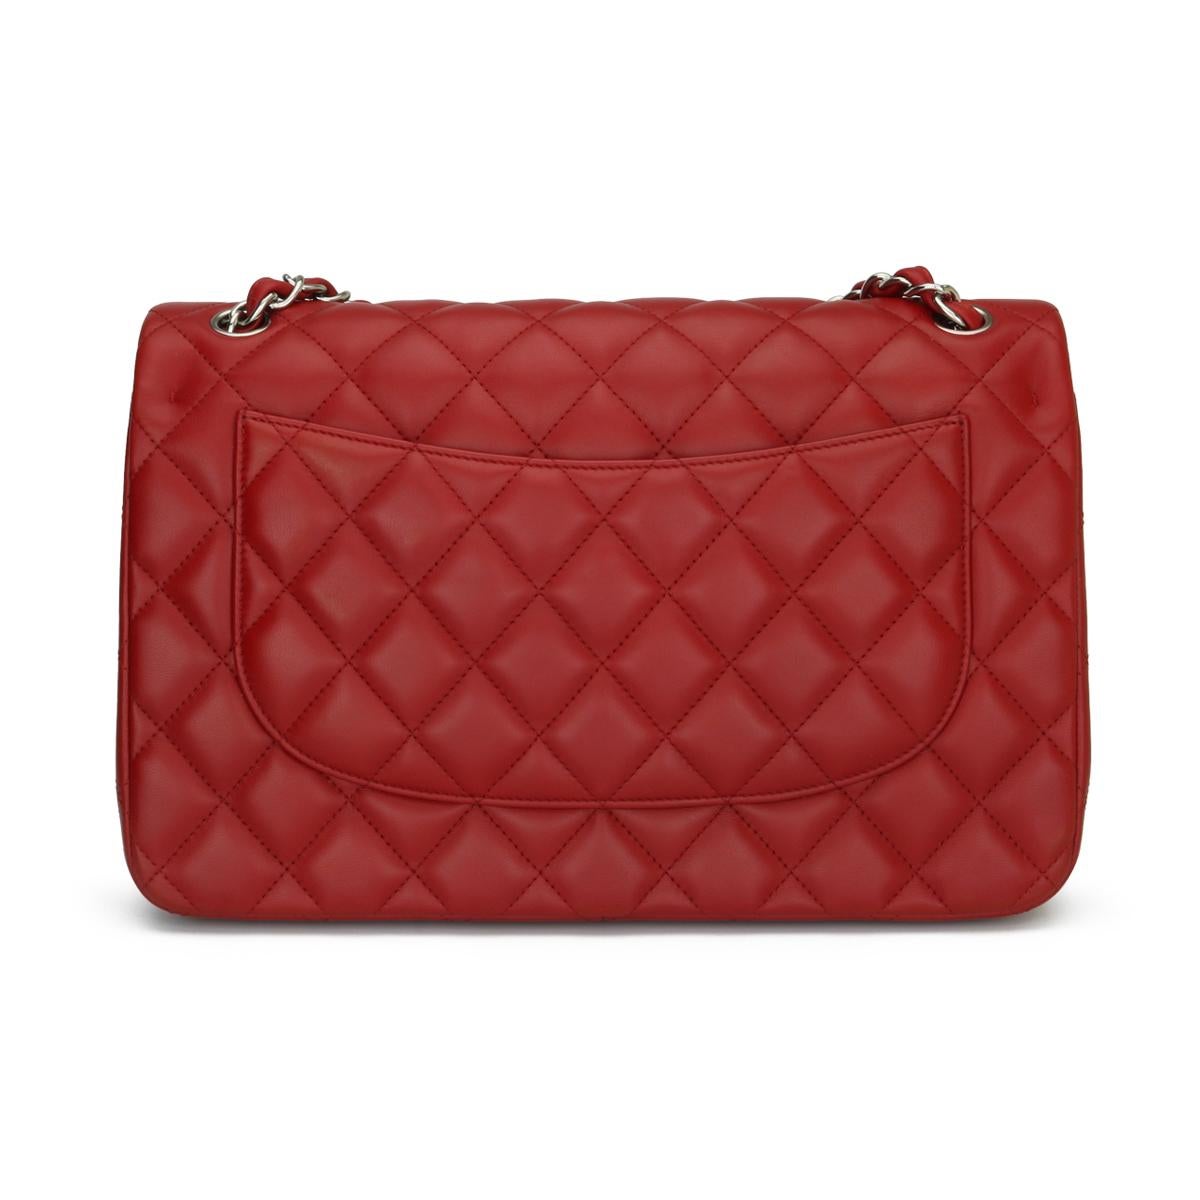 chanel red bag 2013